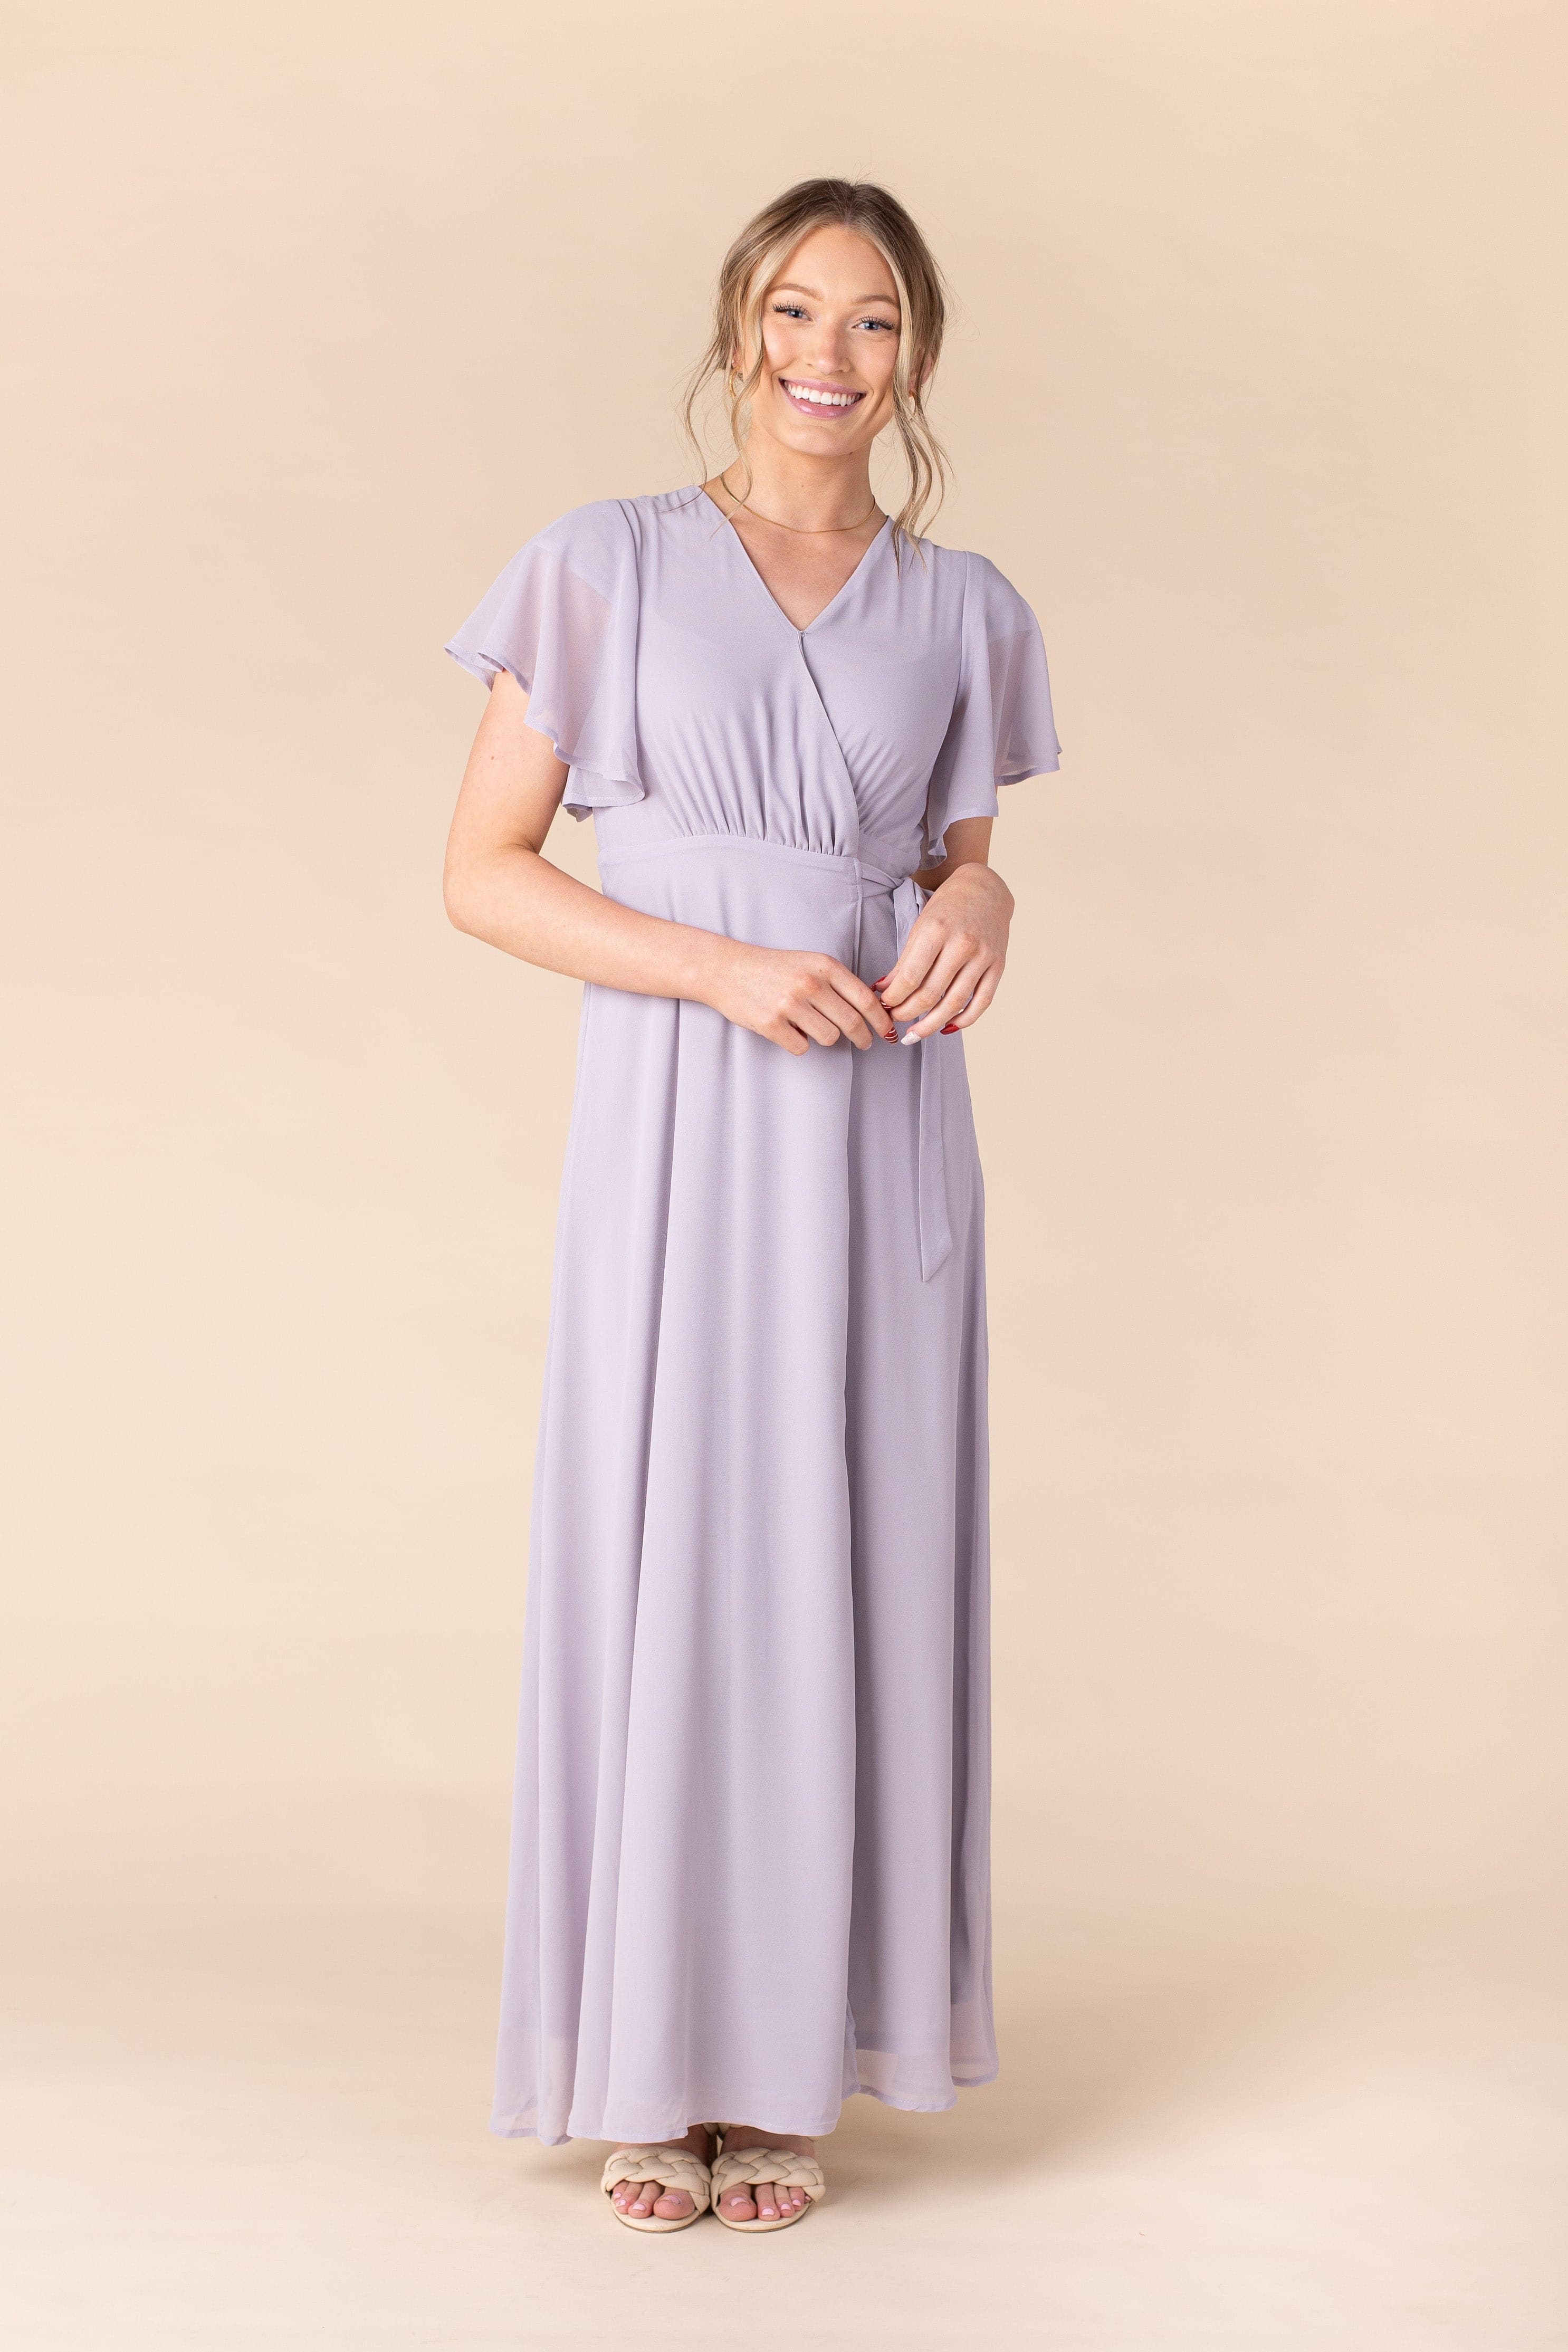 Plus Size Lace Applique Mermaid Lilac Purple Bridesmaid Dresses In Lilac  Color Three Styles For Wedding Quest And Formal Occasions From  Sexypromdress, $78.4 | DHgate.Com